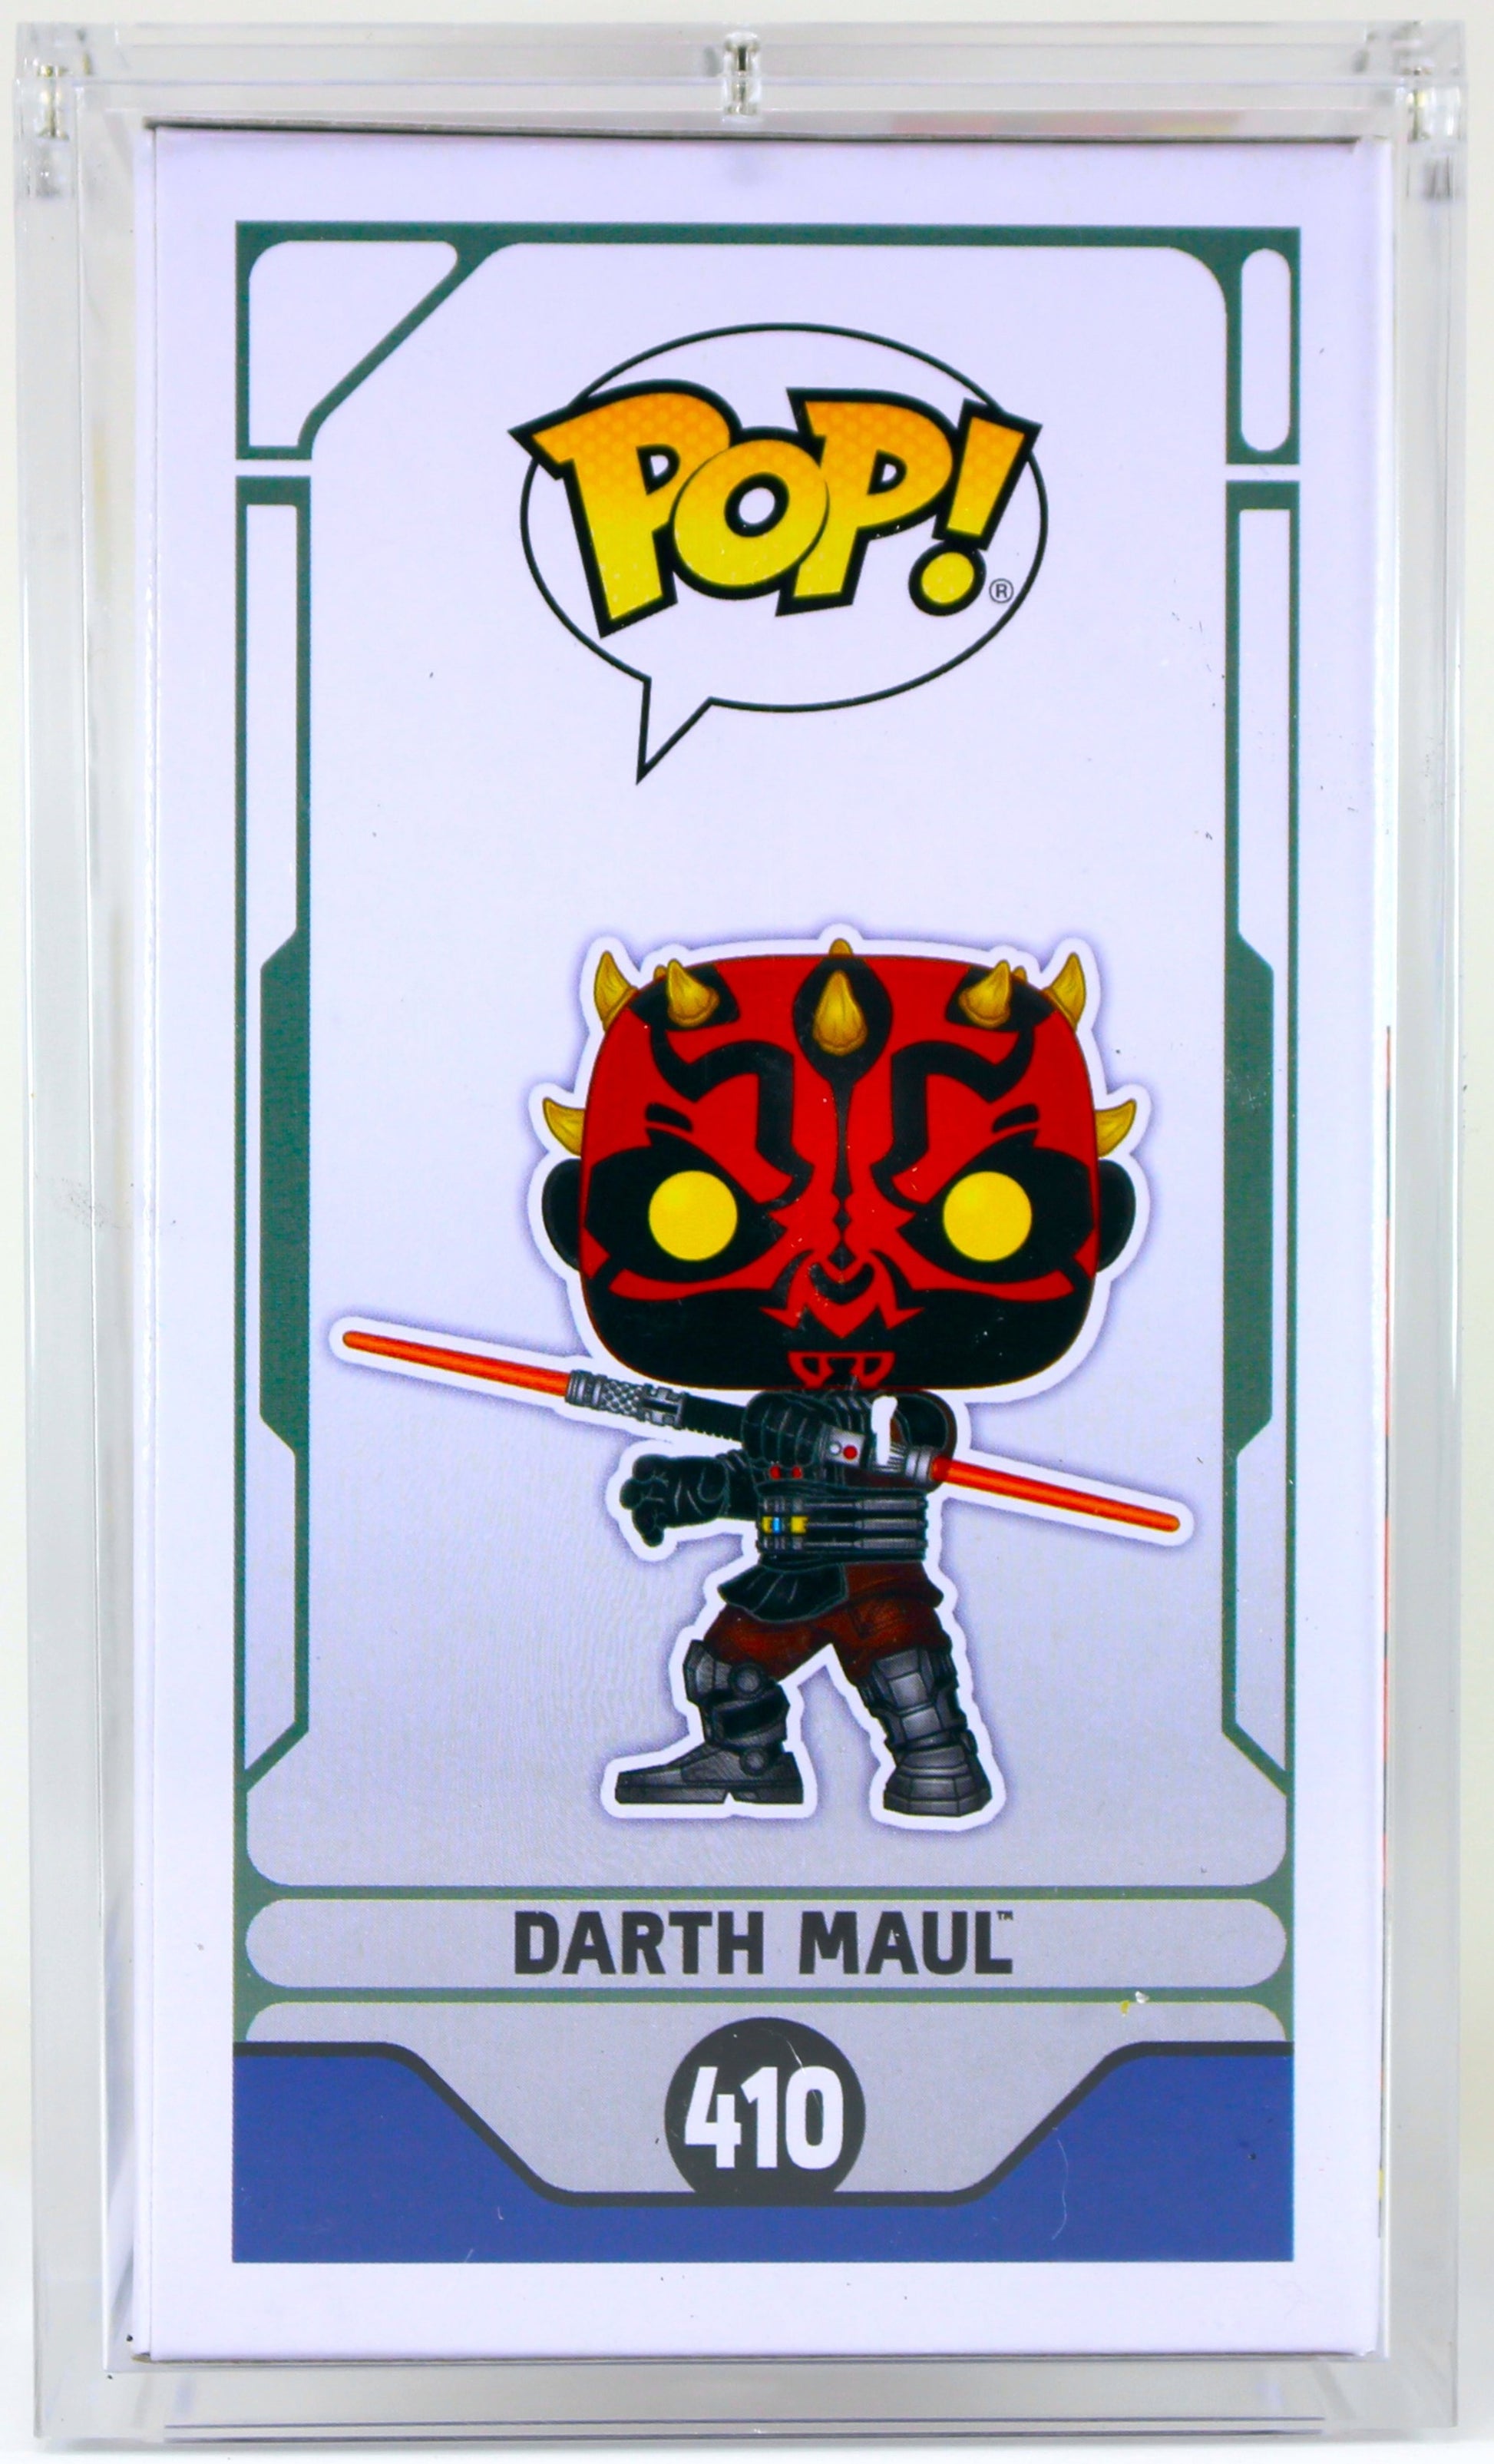 Darth Maul Signed Funko POP! Star Wars - Autographed by Sam Witwer - Signature is Authenticated By SWAU ✅ - DaFunkoShop - Funko Pop! Star Wars